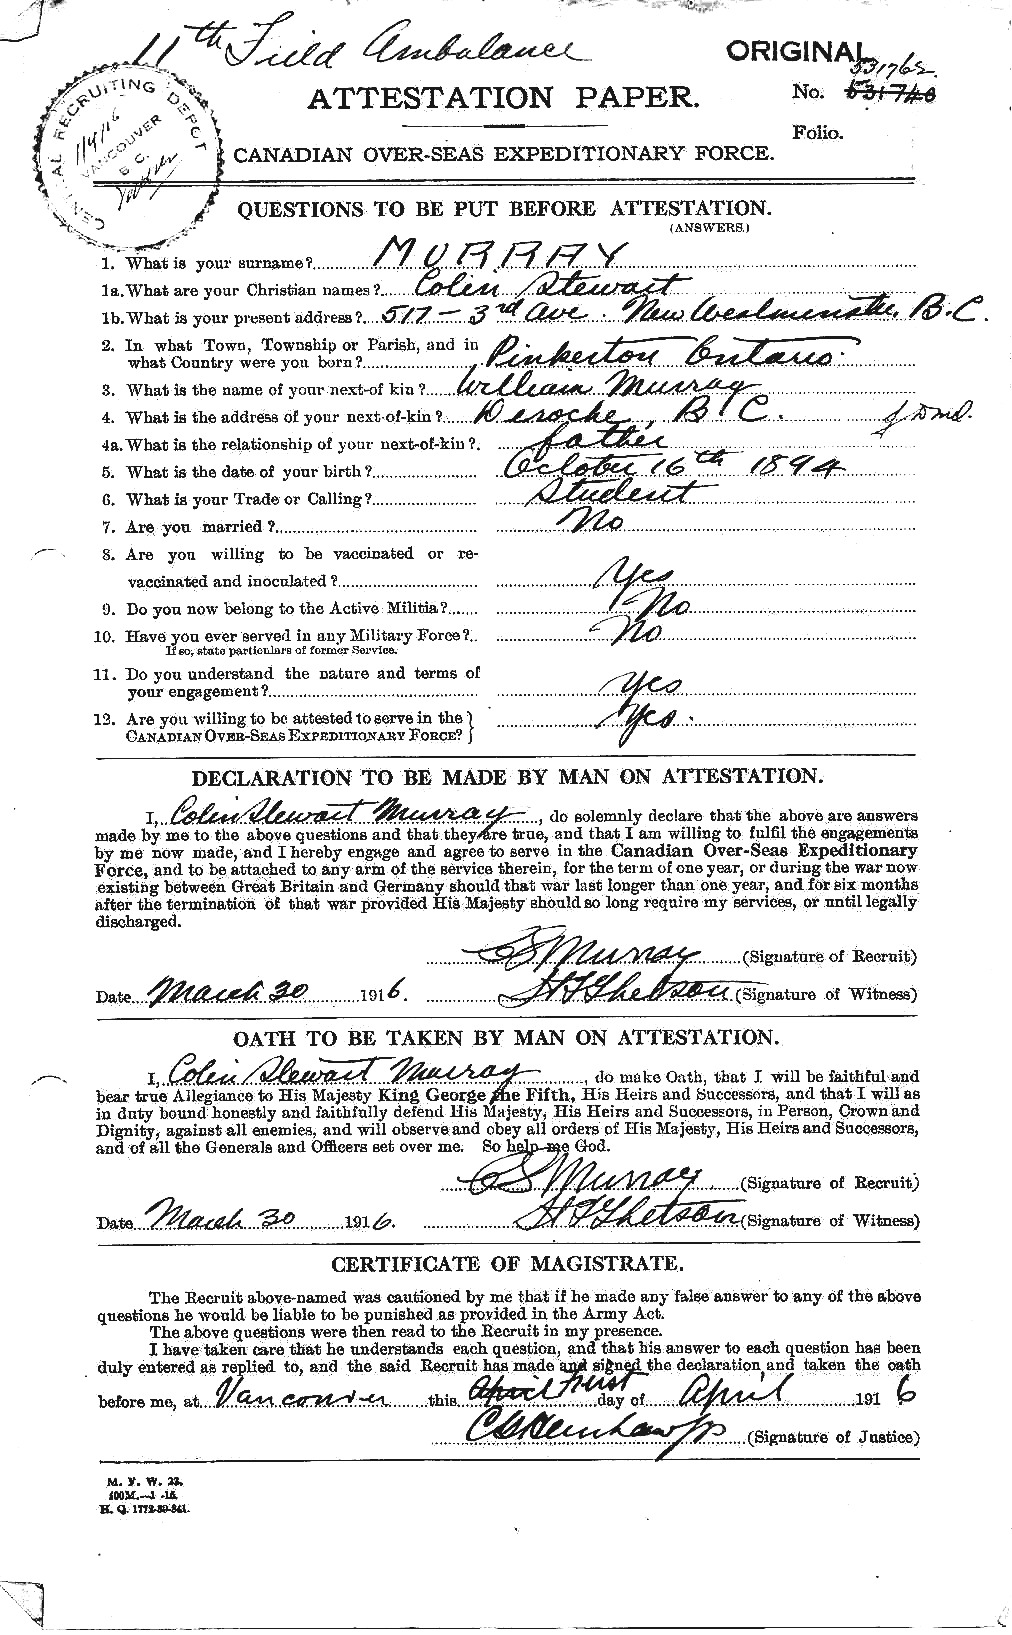 Personnel Records of the First World War - CEF 517673a